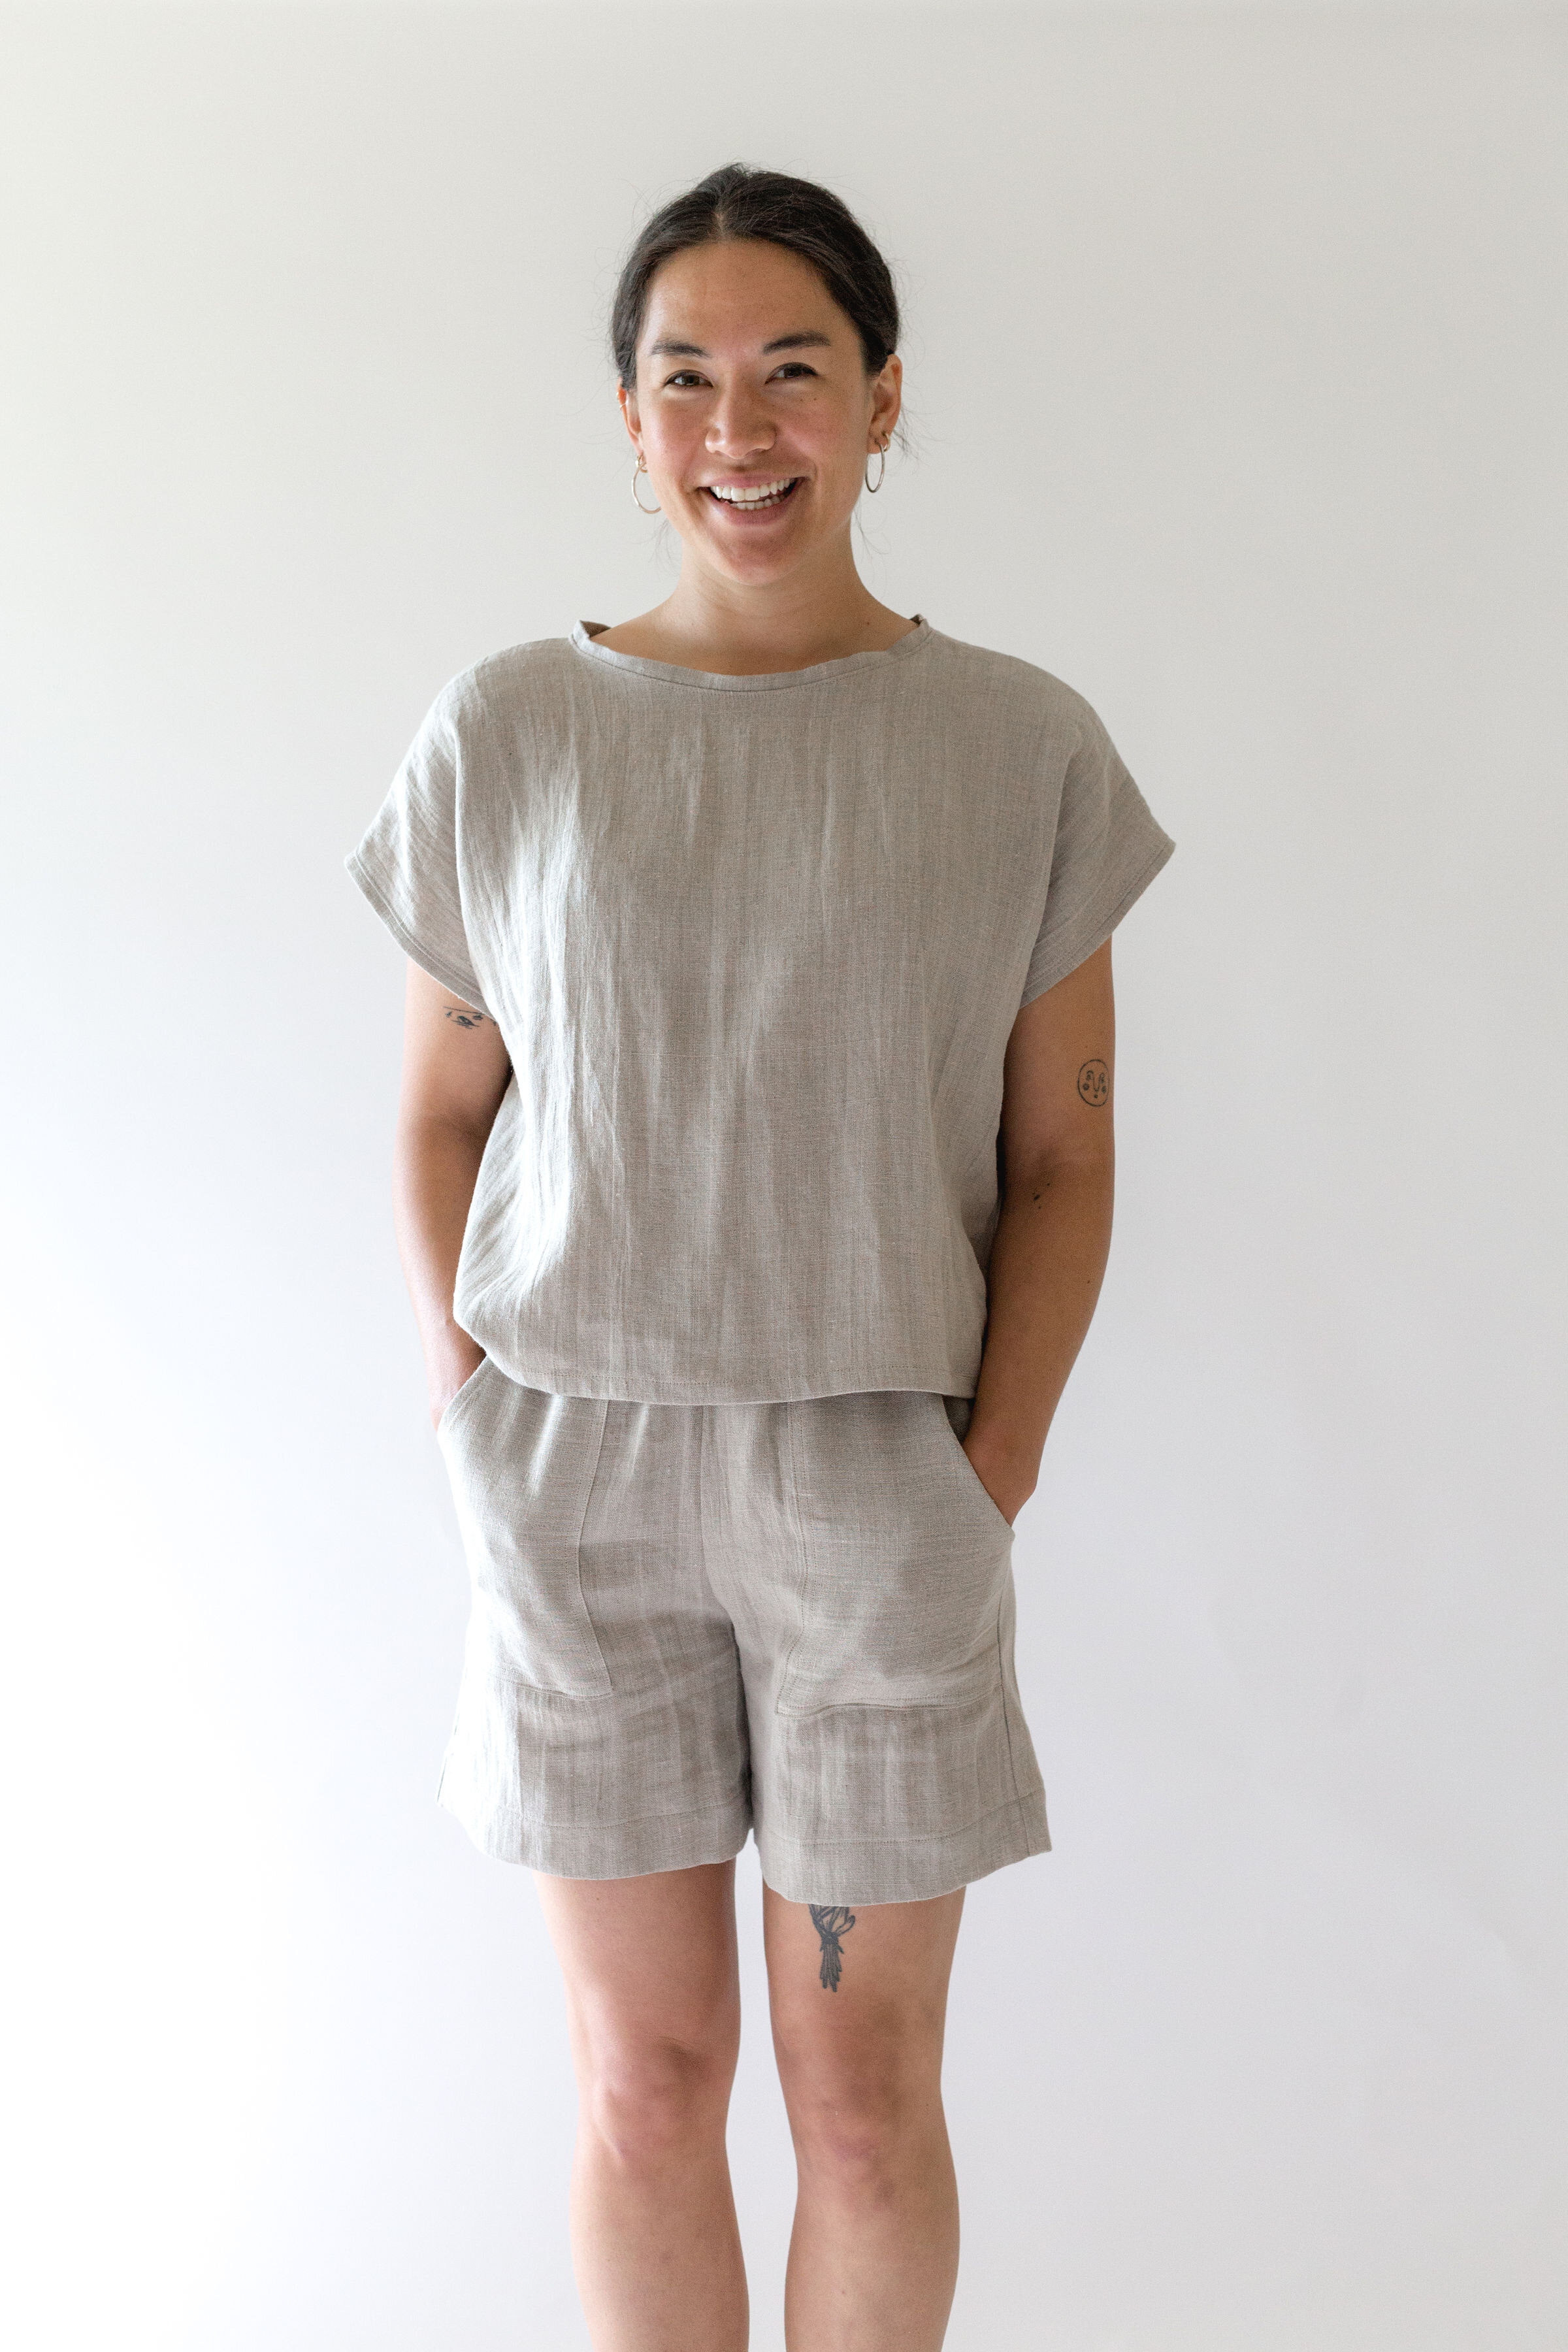 Stephanie shorts in Natural, Jessie top in Natural copy.jpg